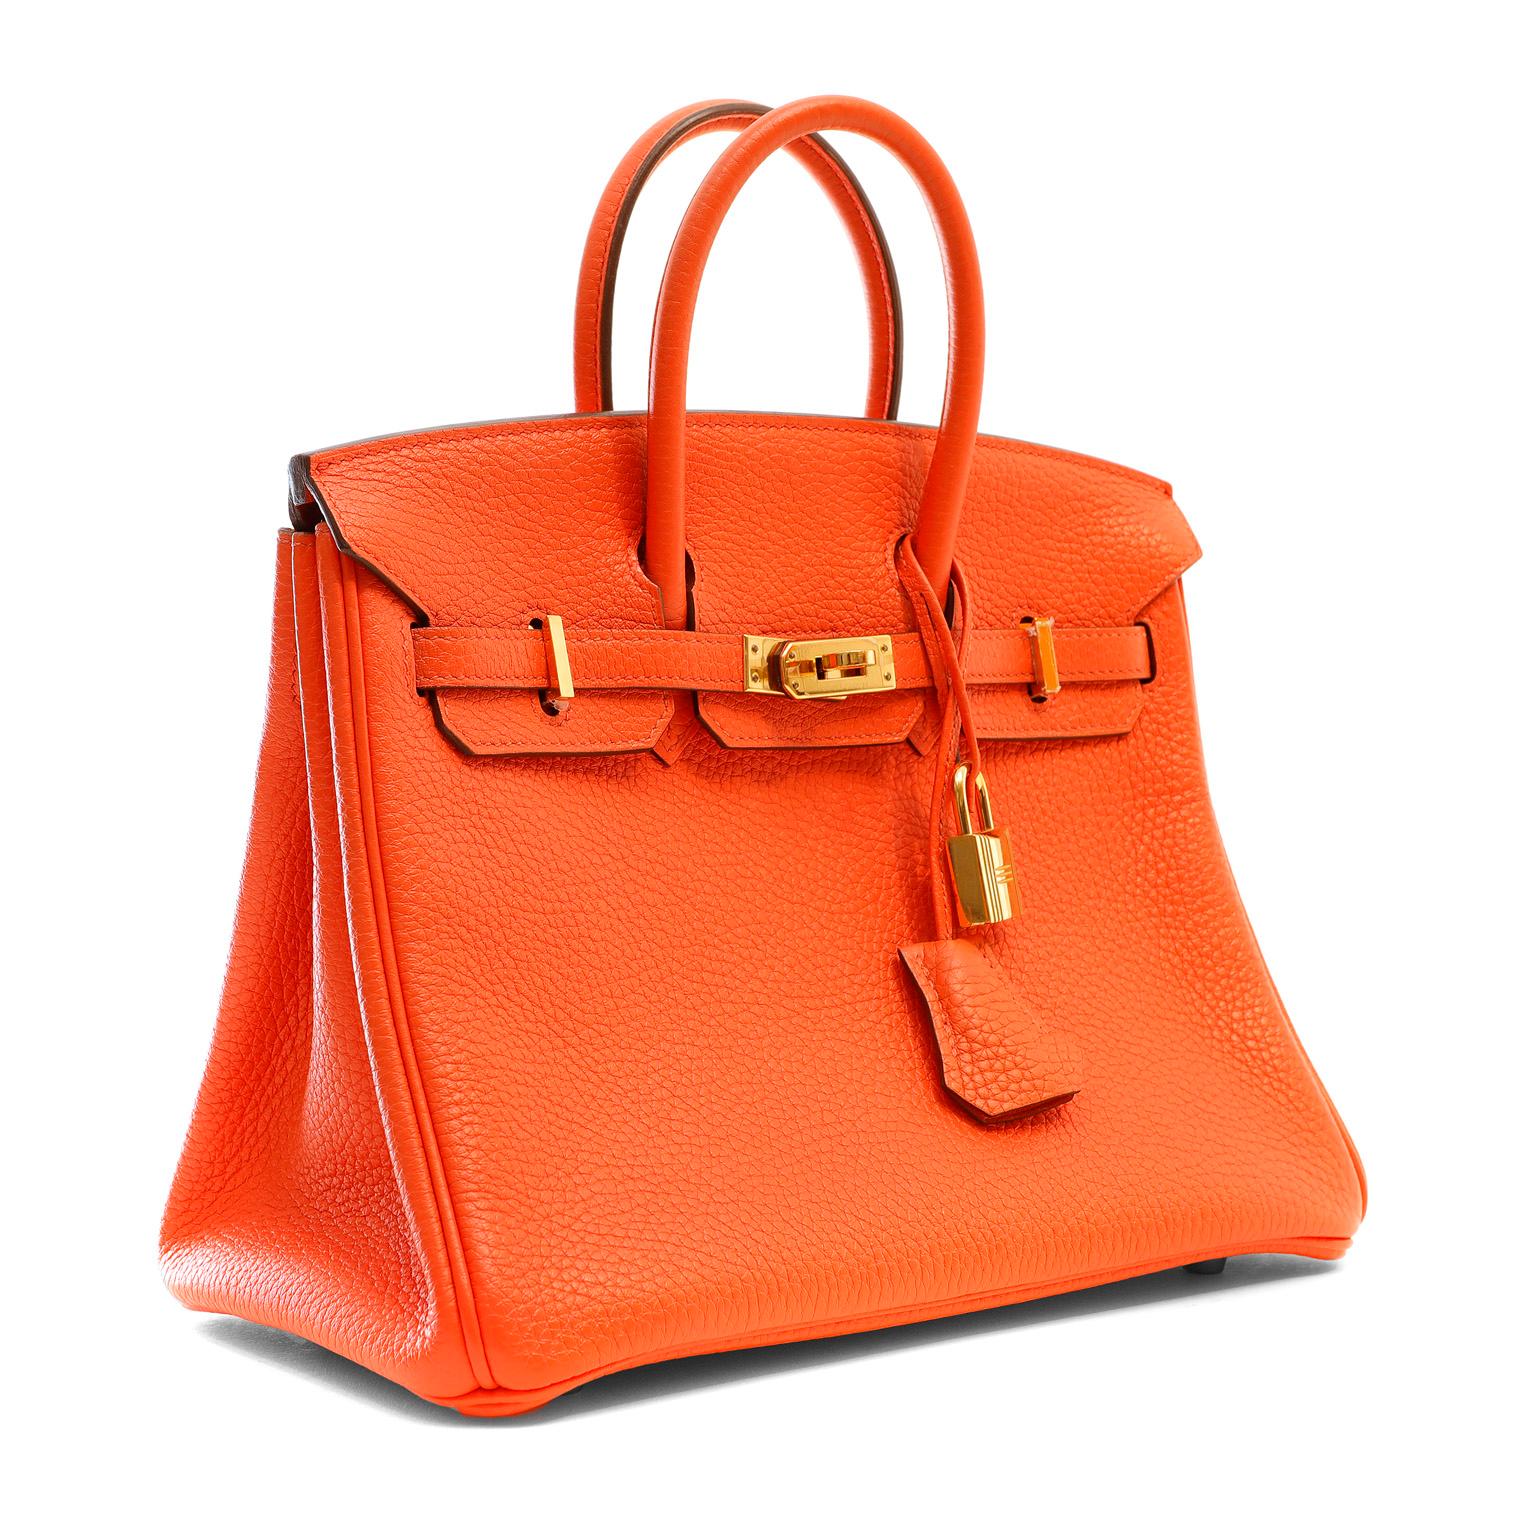 This authentic Hermès Poppy Orange Togo 25 cm Birkin is in pristine unworn condition with the protective plastic on the hardware.  A vibrant orange with a pinky undertone, it is perfectly paired with warm gold hardware.

Togo is scratch resistant